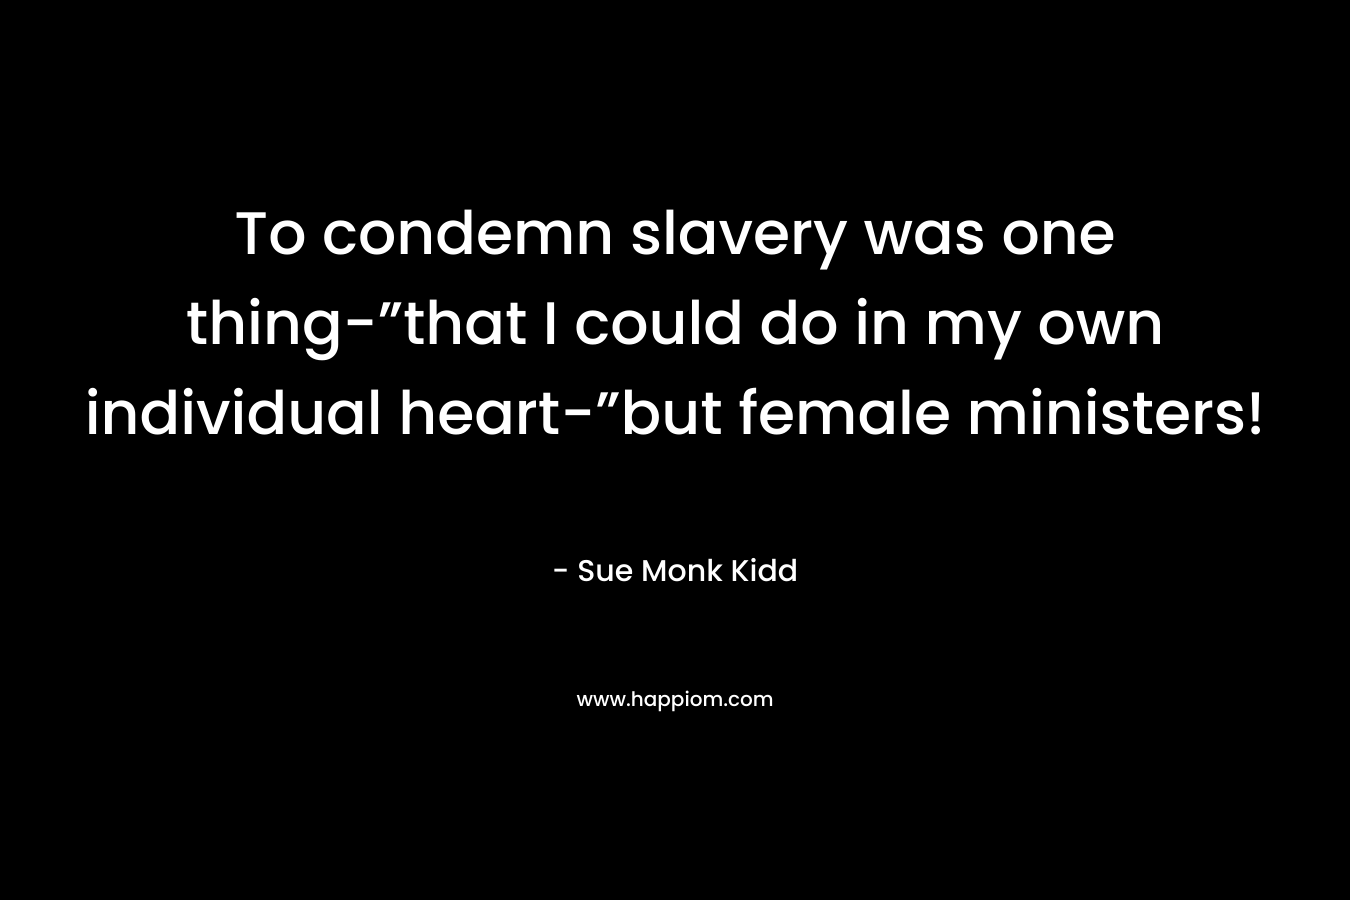 To condemn slavery was one thing-”that I could do in my own individual heart-”but female ministers! – Sue Monk Kidd